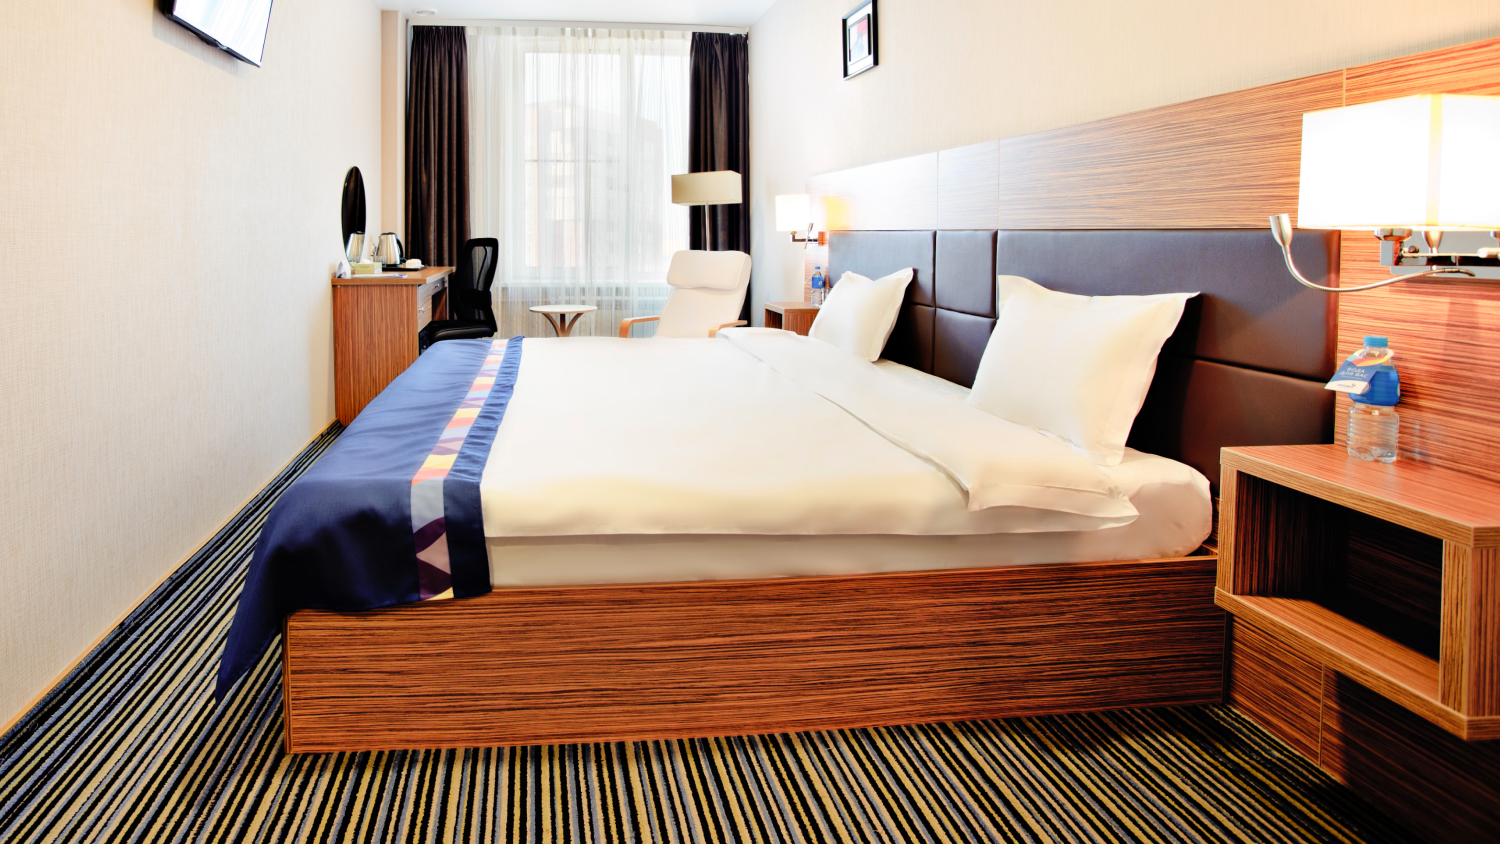 Superior room with extra bed - at the Astoria Hotel ★ ★ ★, Vladivostok.